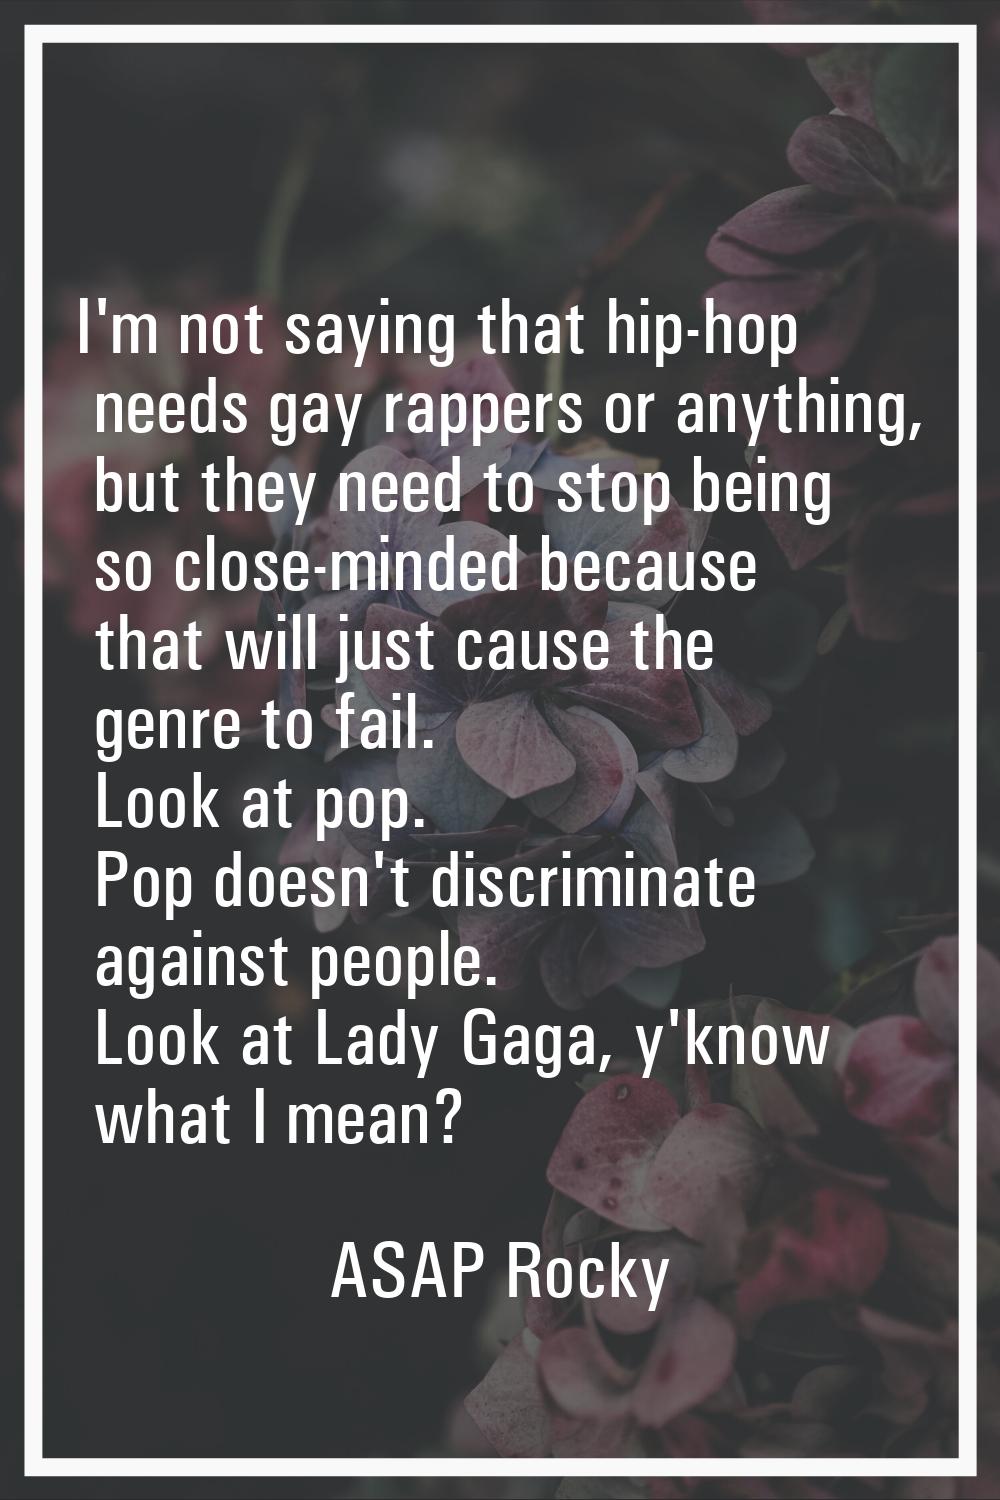 I'm not saying that hip-hop needs gay rappers or anything, but they need to stop being so close-min